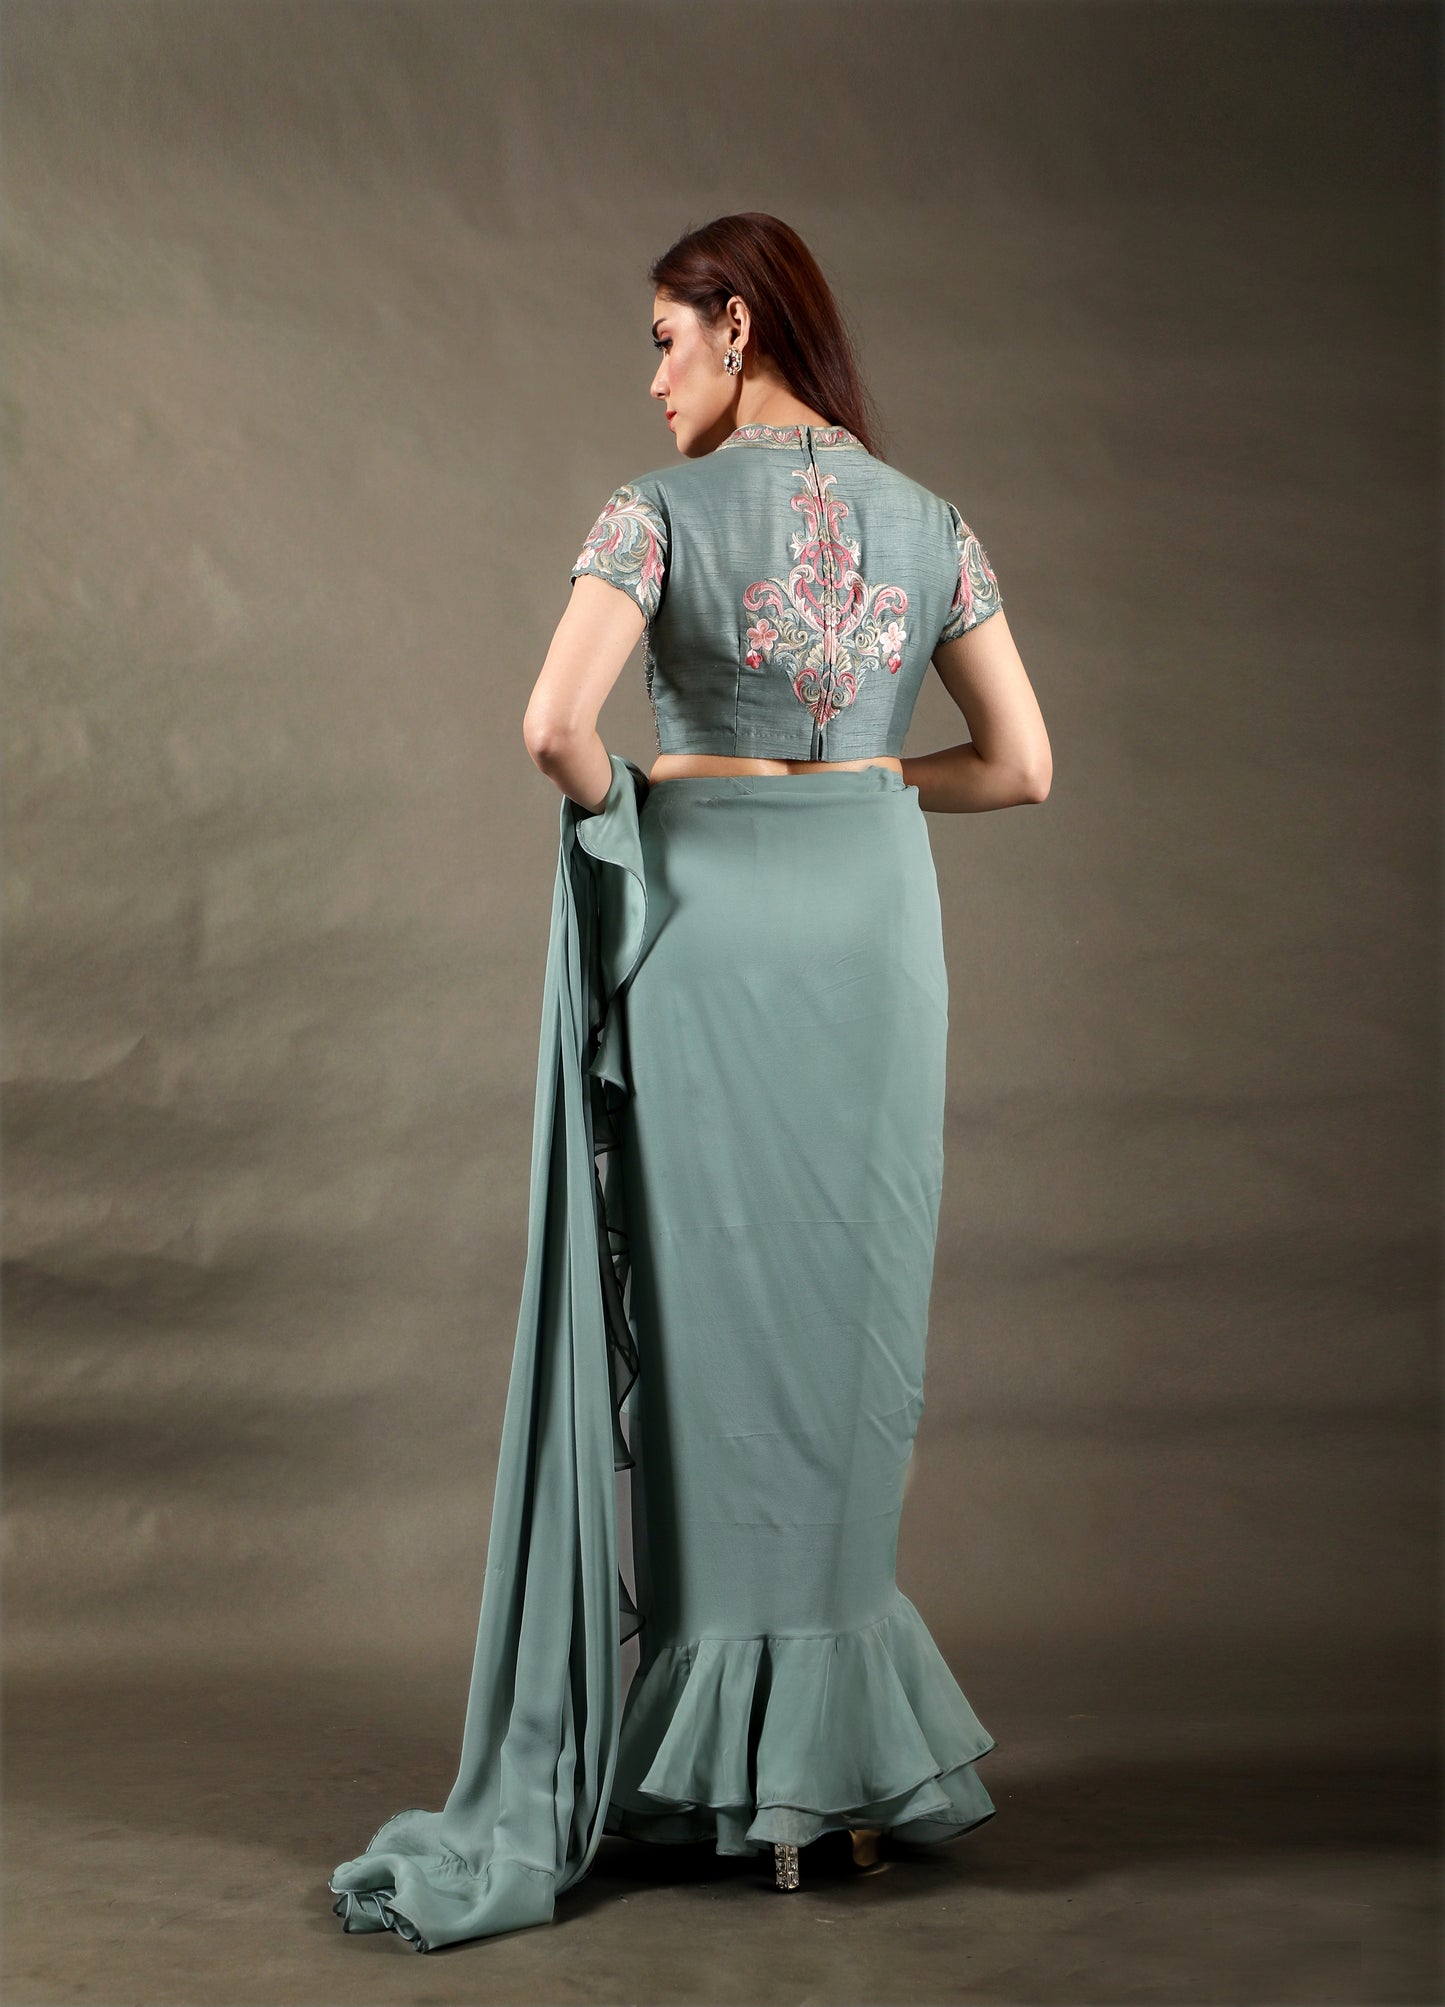 Pre-Draped Saree with Frill on the Pallu and a High neck Multi-color embroidered blouse with hand embroidery.